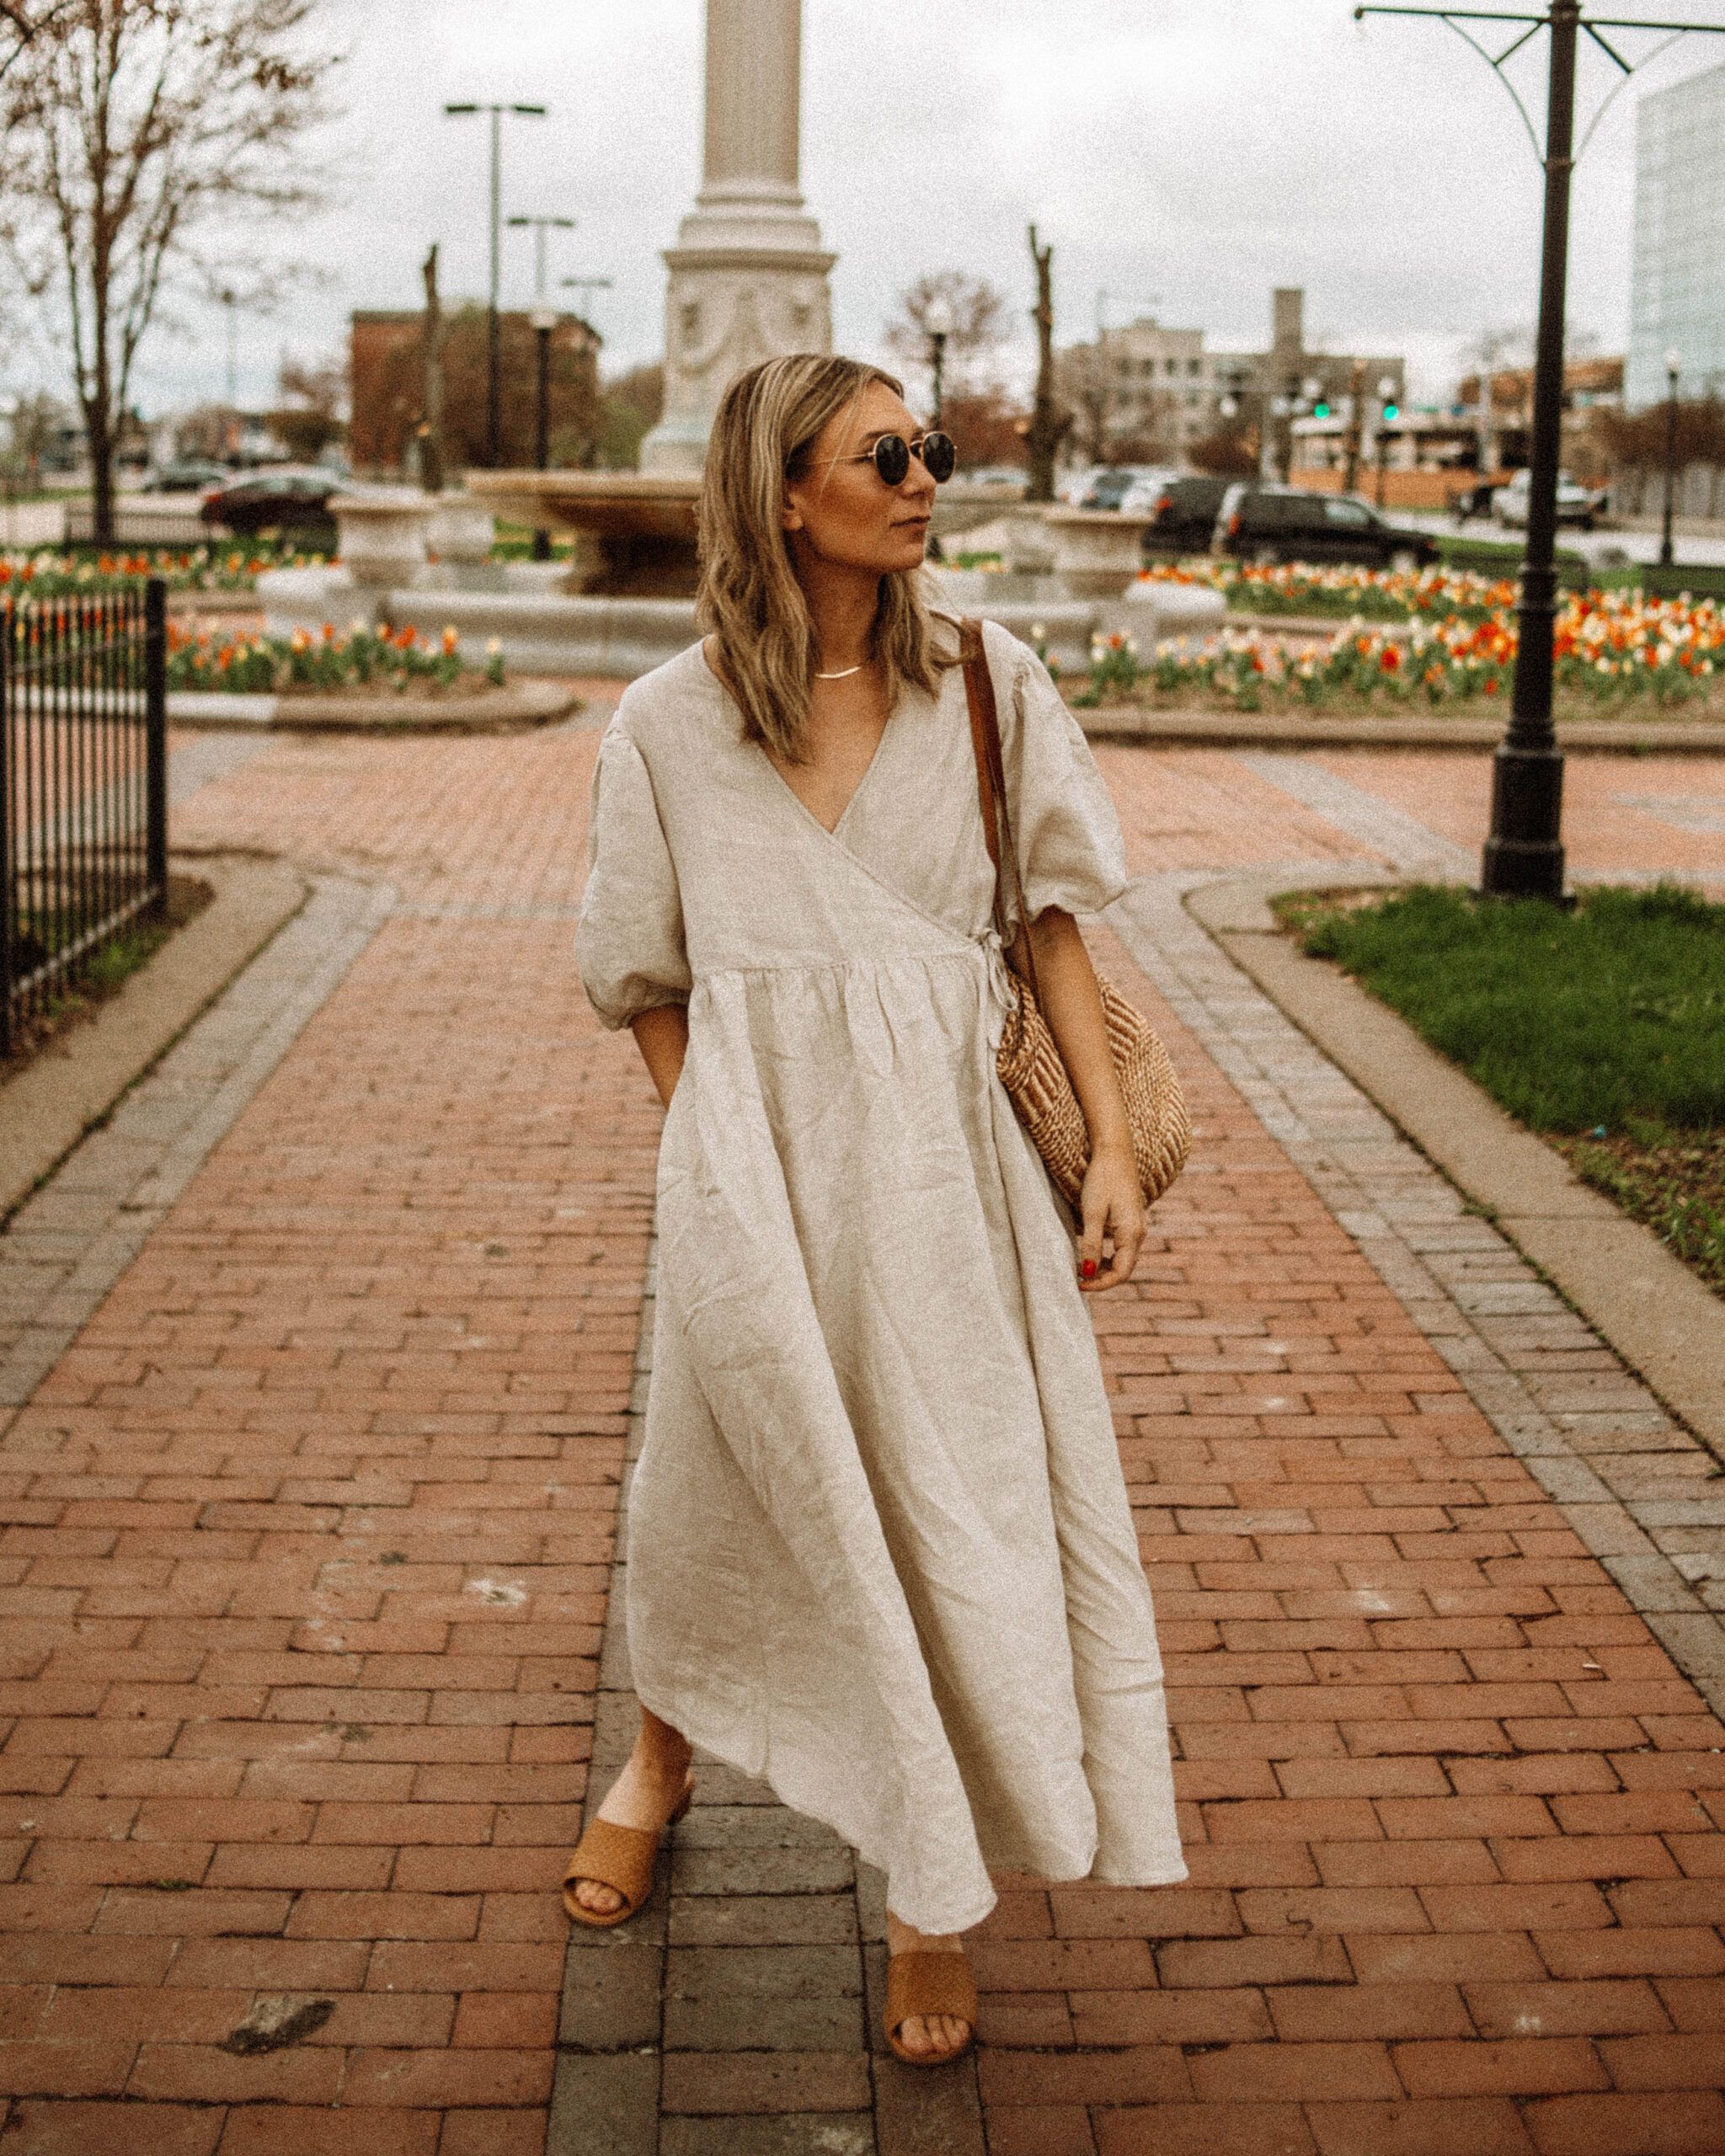 Style with Linen dresses for summer